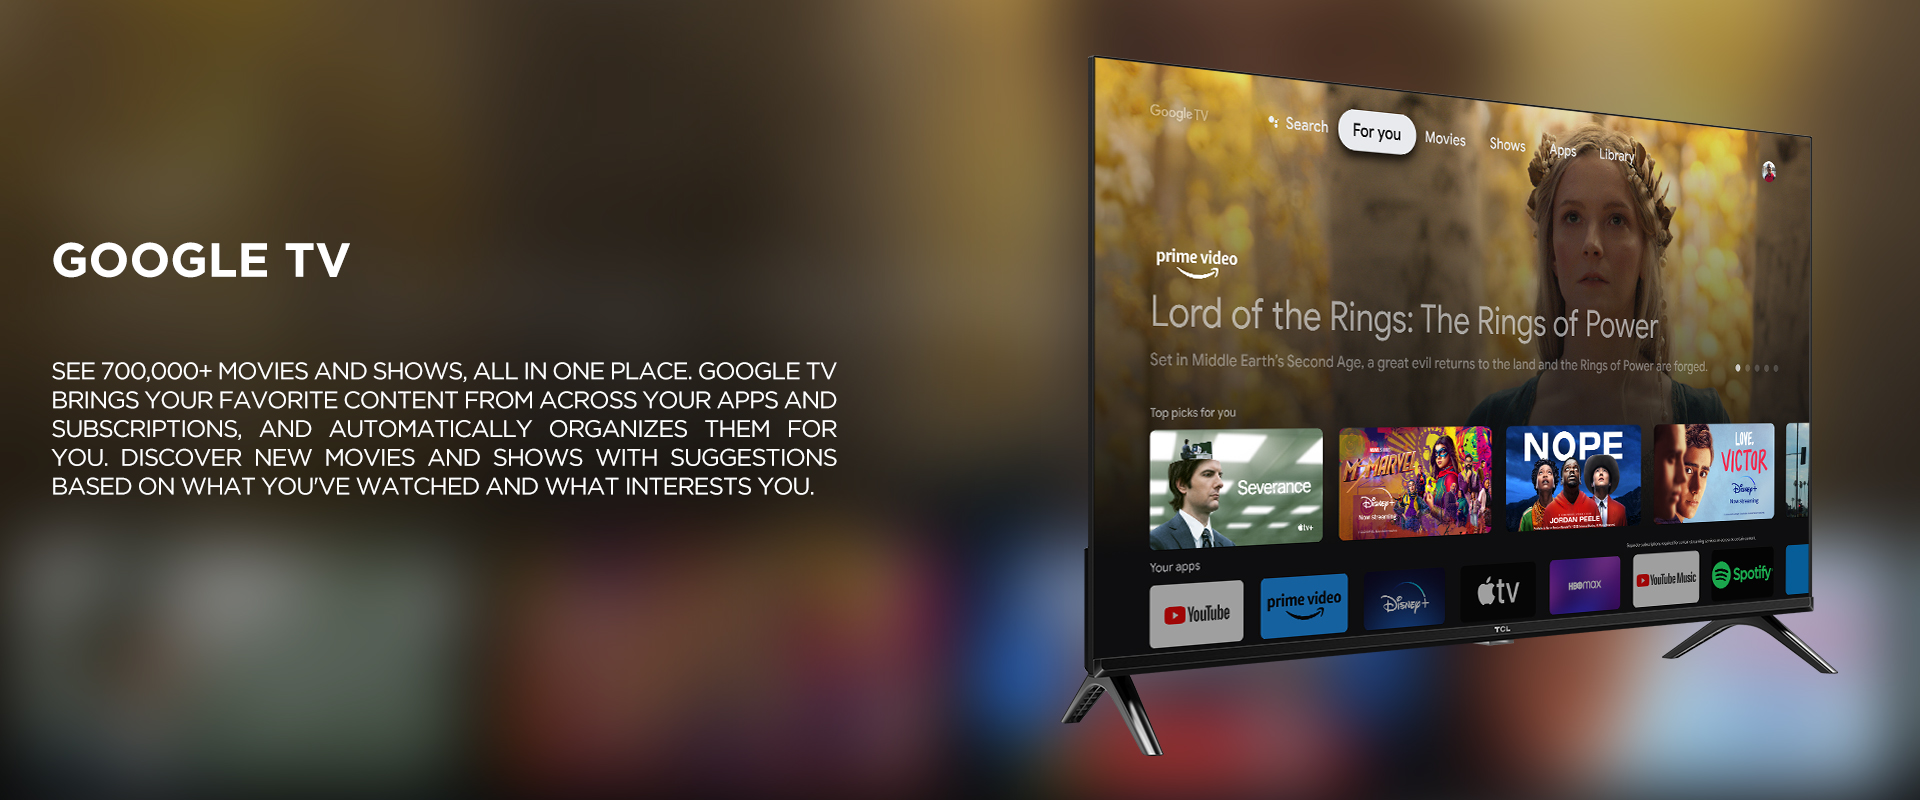 GOOGLE TV - See 700,000+ movies and shows, all in one place. Google TV brings your favorite content from across your apps and subscriptions, and automatically organizes them for you. Discover new movies and shows with suggestions based on what you've watched and what interests you.